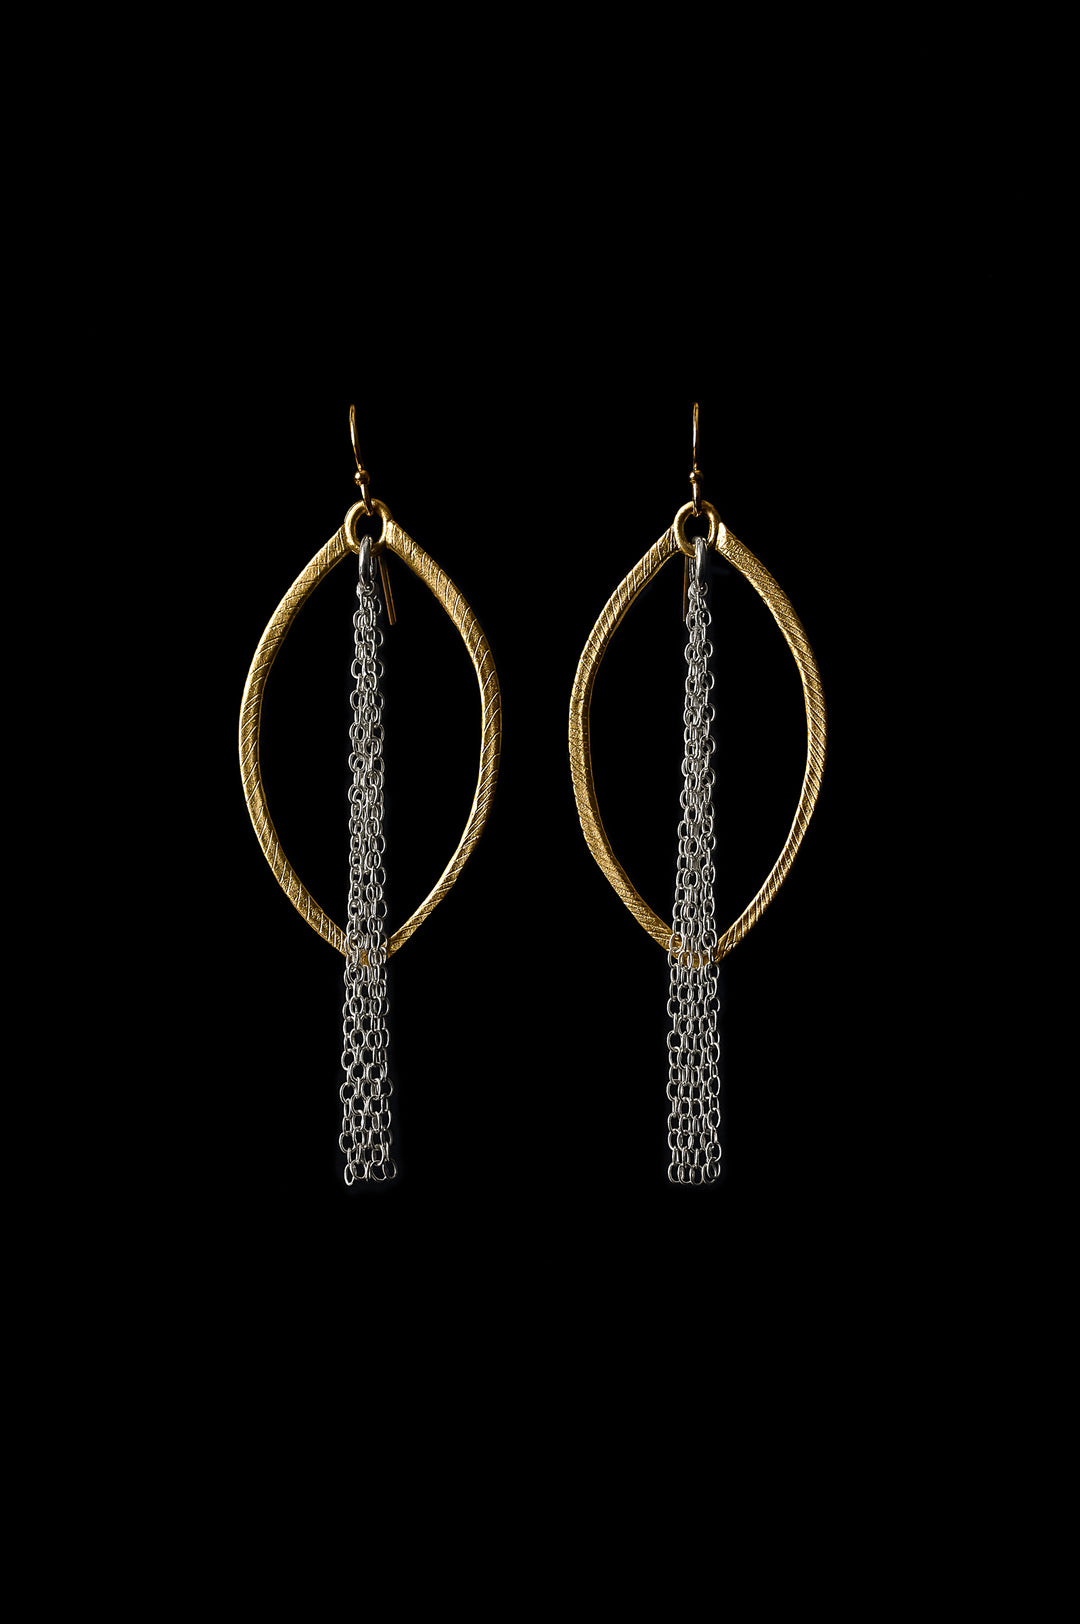 Earrings - Hammered Gold Leaf (outline) with Sterling Silver Chains - Sustainable